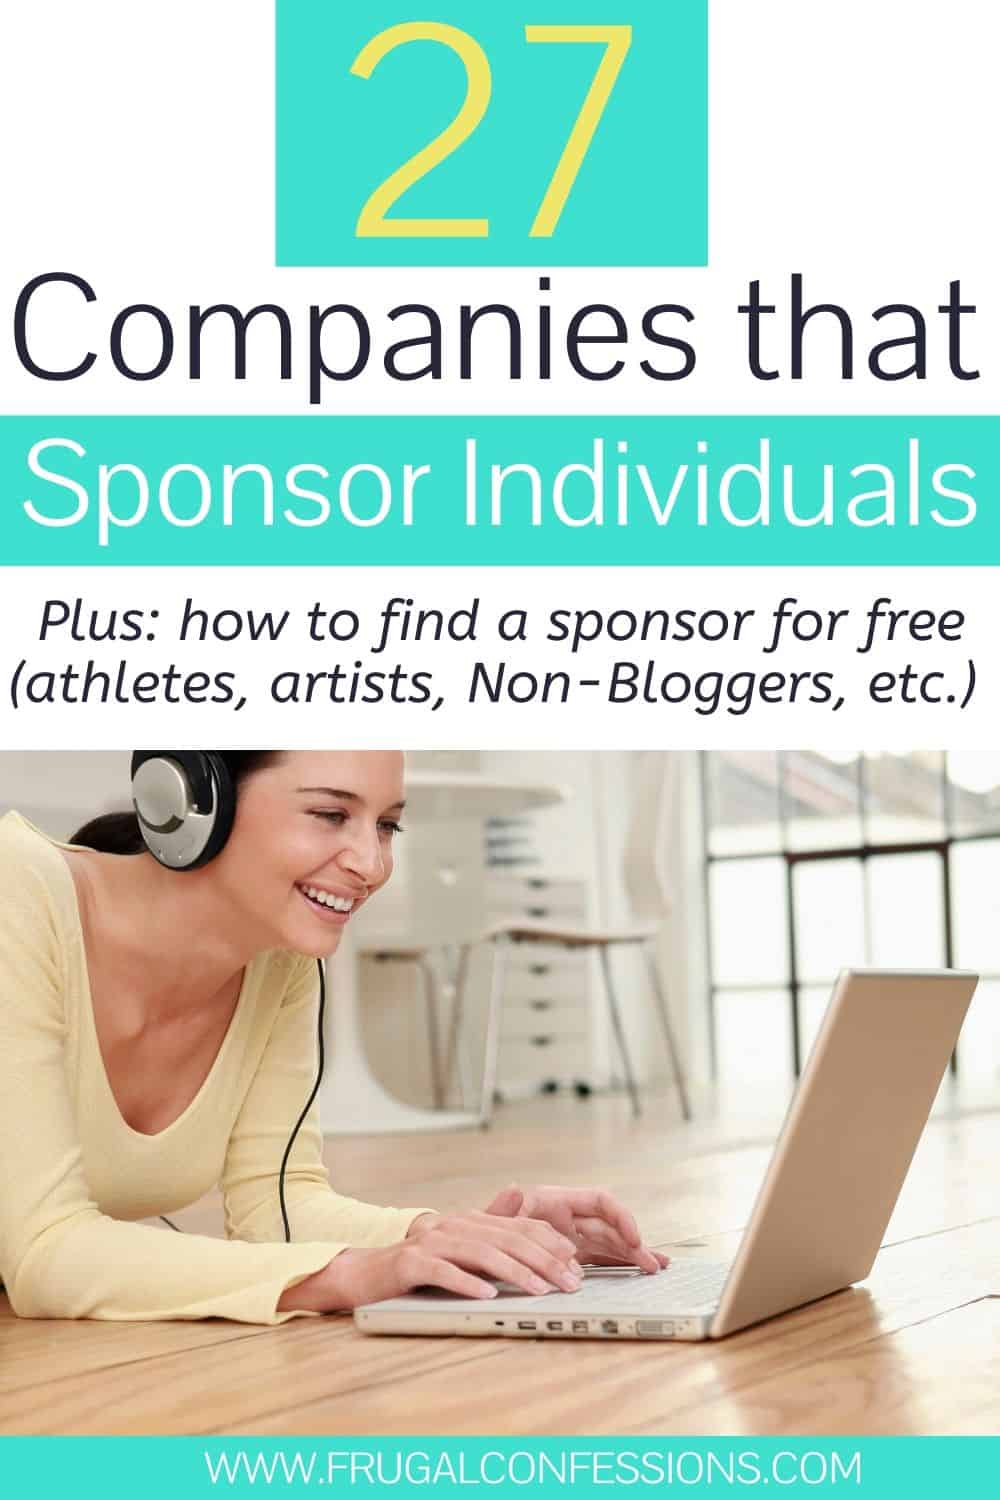 woman on laptop looking for sponsorships, text overlay 